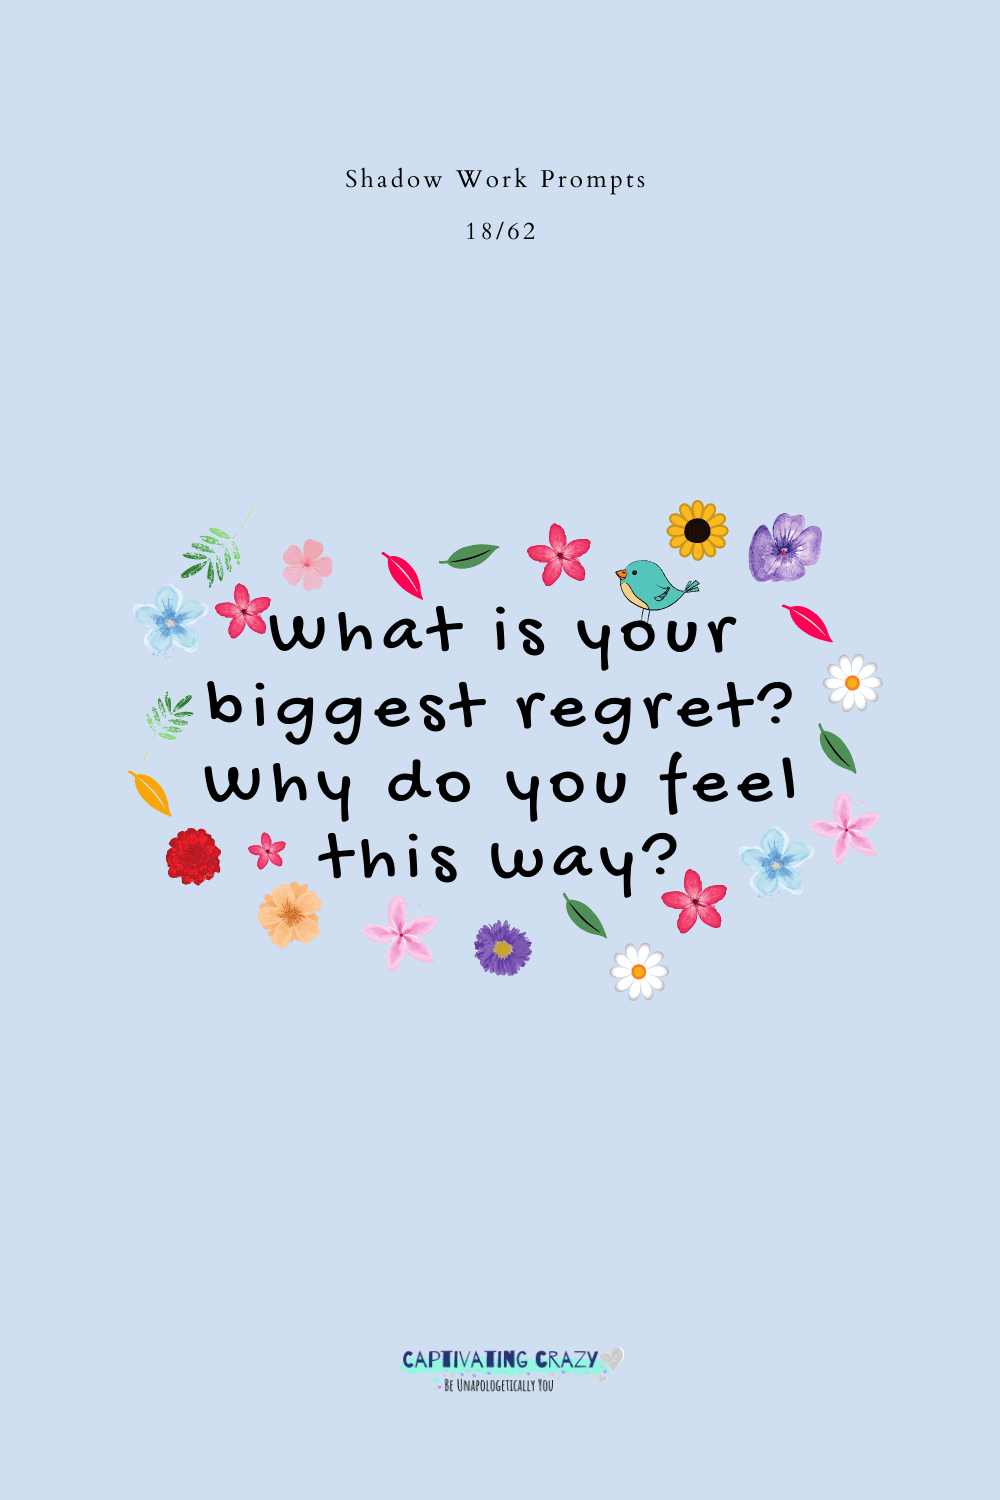 What is your biggest regret? Why do you feel this way?